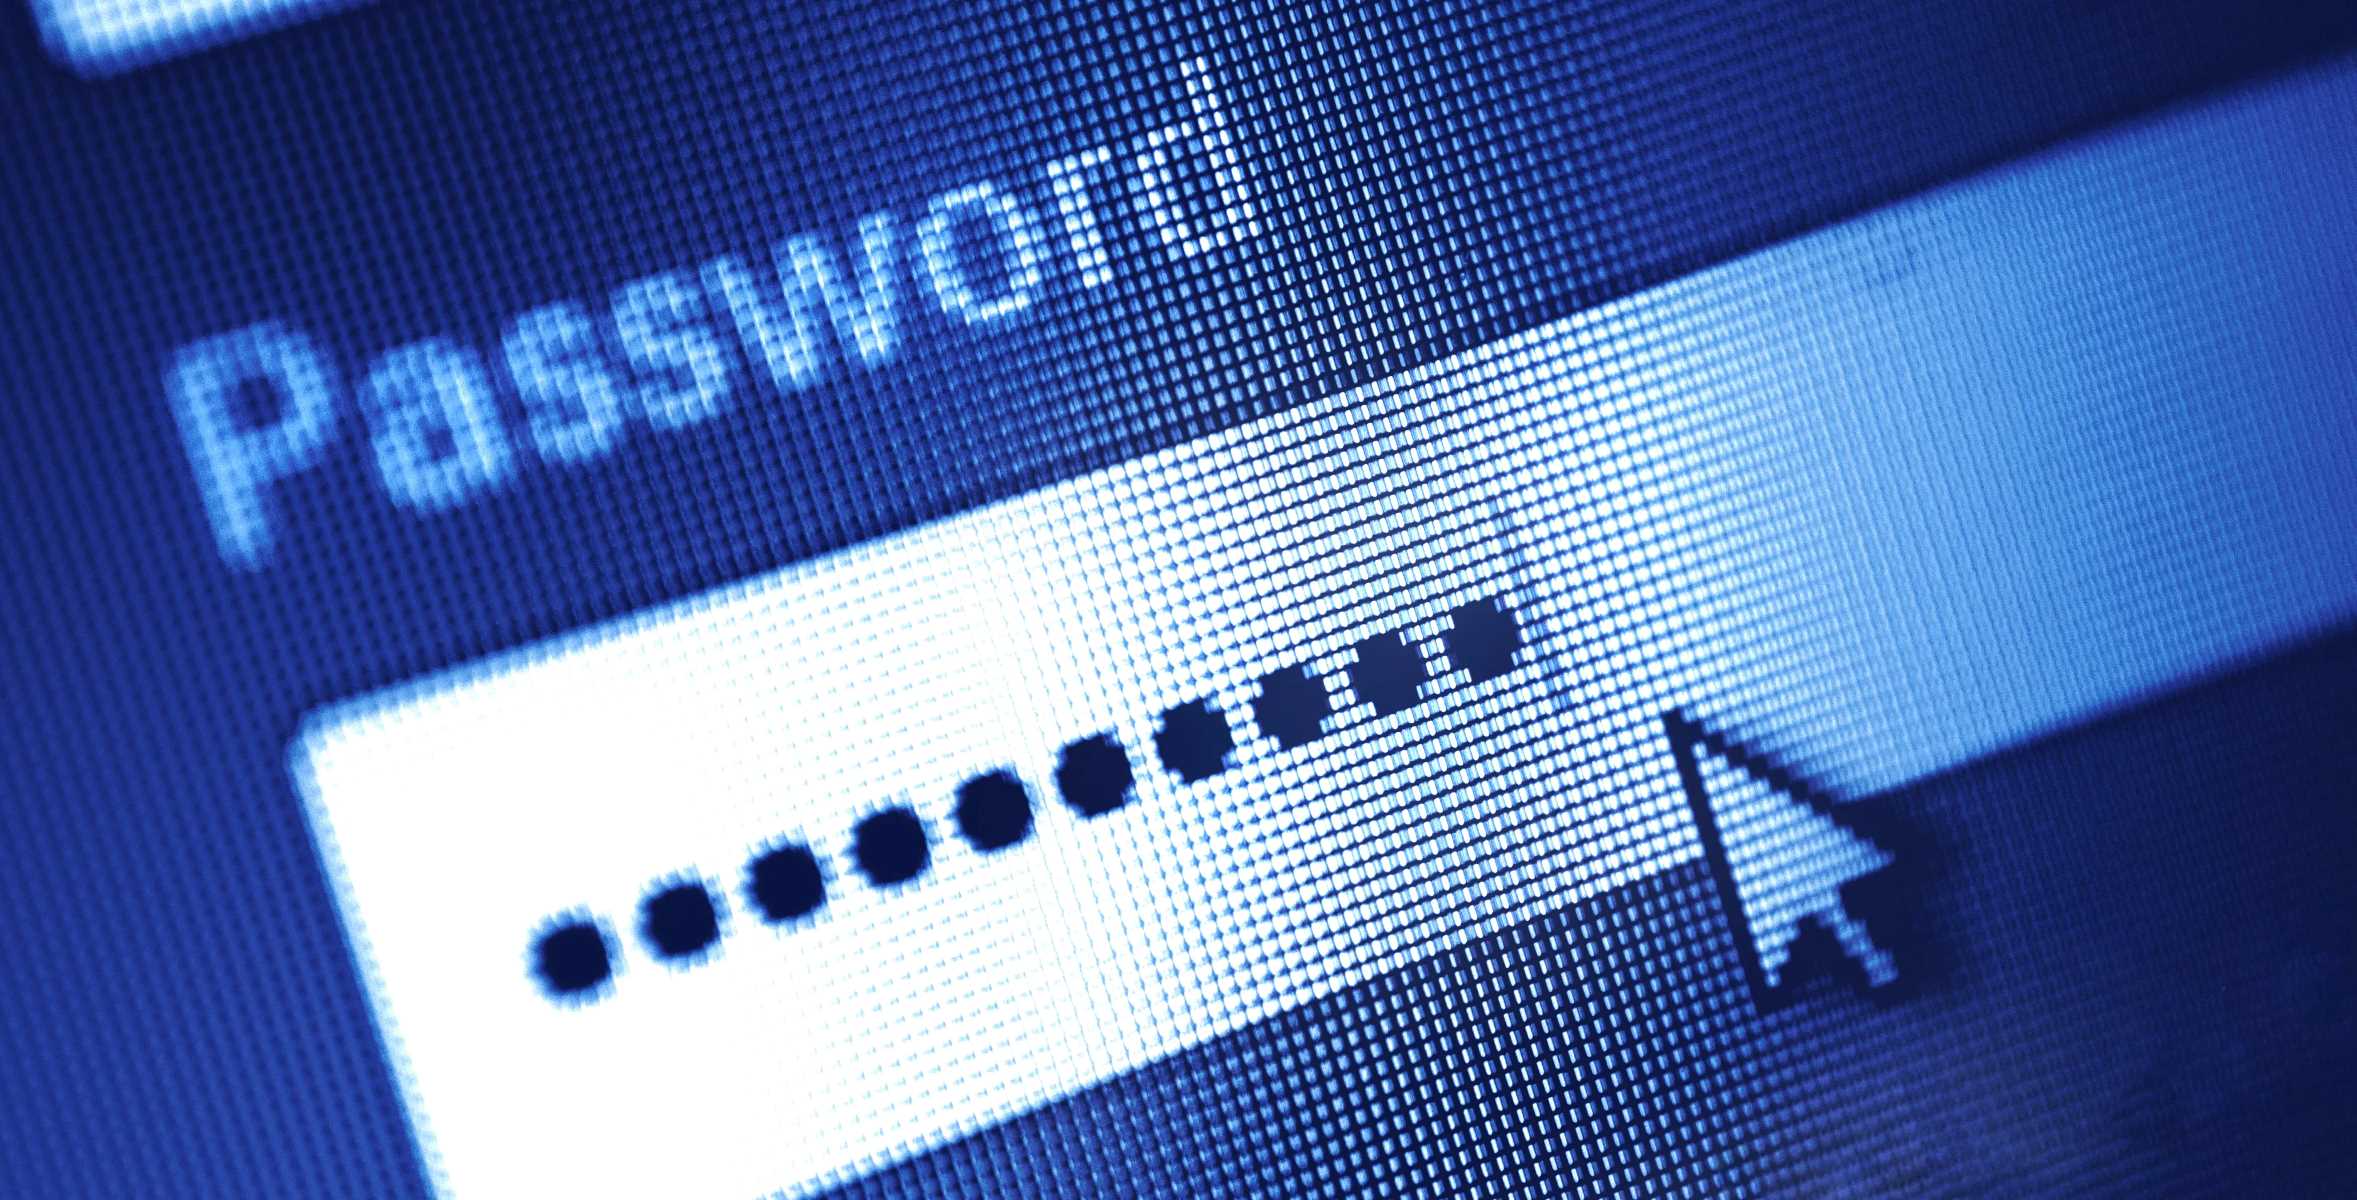 How To Find Your Email Password